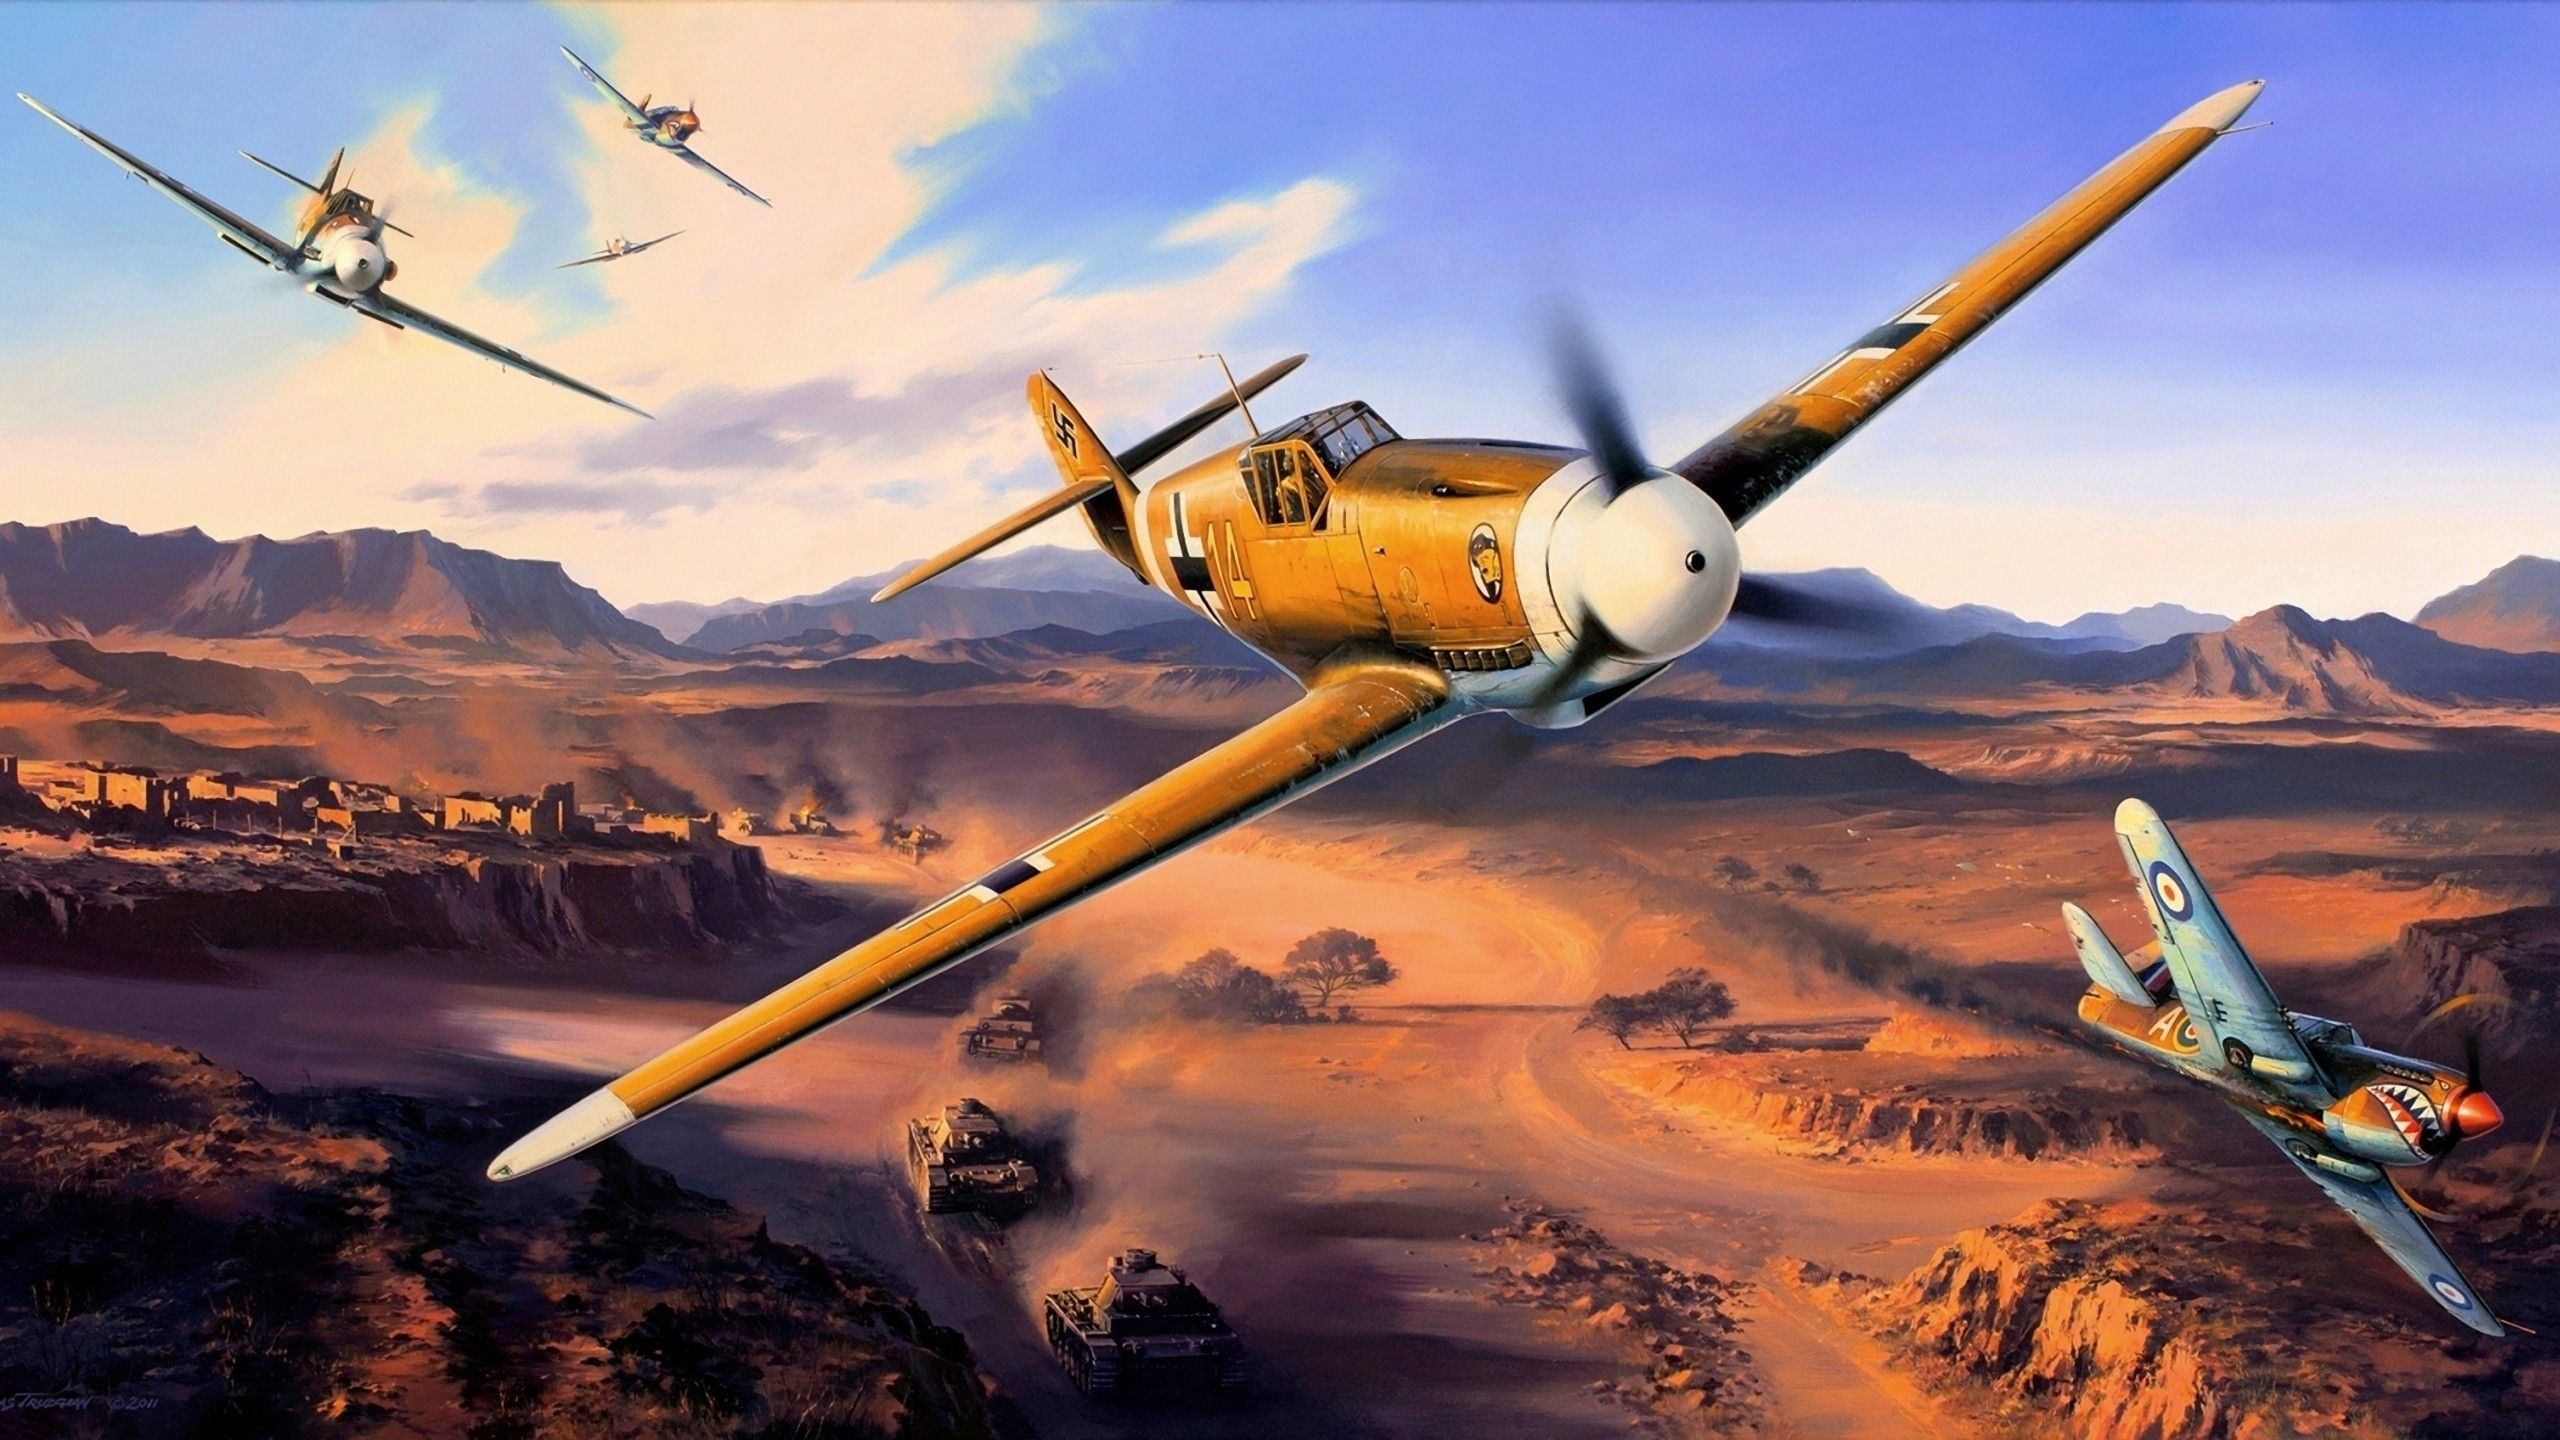 Free download Ww2 Plane Wallpaper Aircraft world [2560x1440] for your Desktop, Mobile & Tablet. Explore WW2 Aircraft Wallpaper. Aircraft Wallpaper 1920x WW2 Fighter Aircraft Wallpaper, WWII Aircraft Desktop Wallpaper